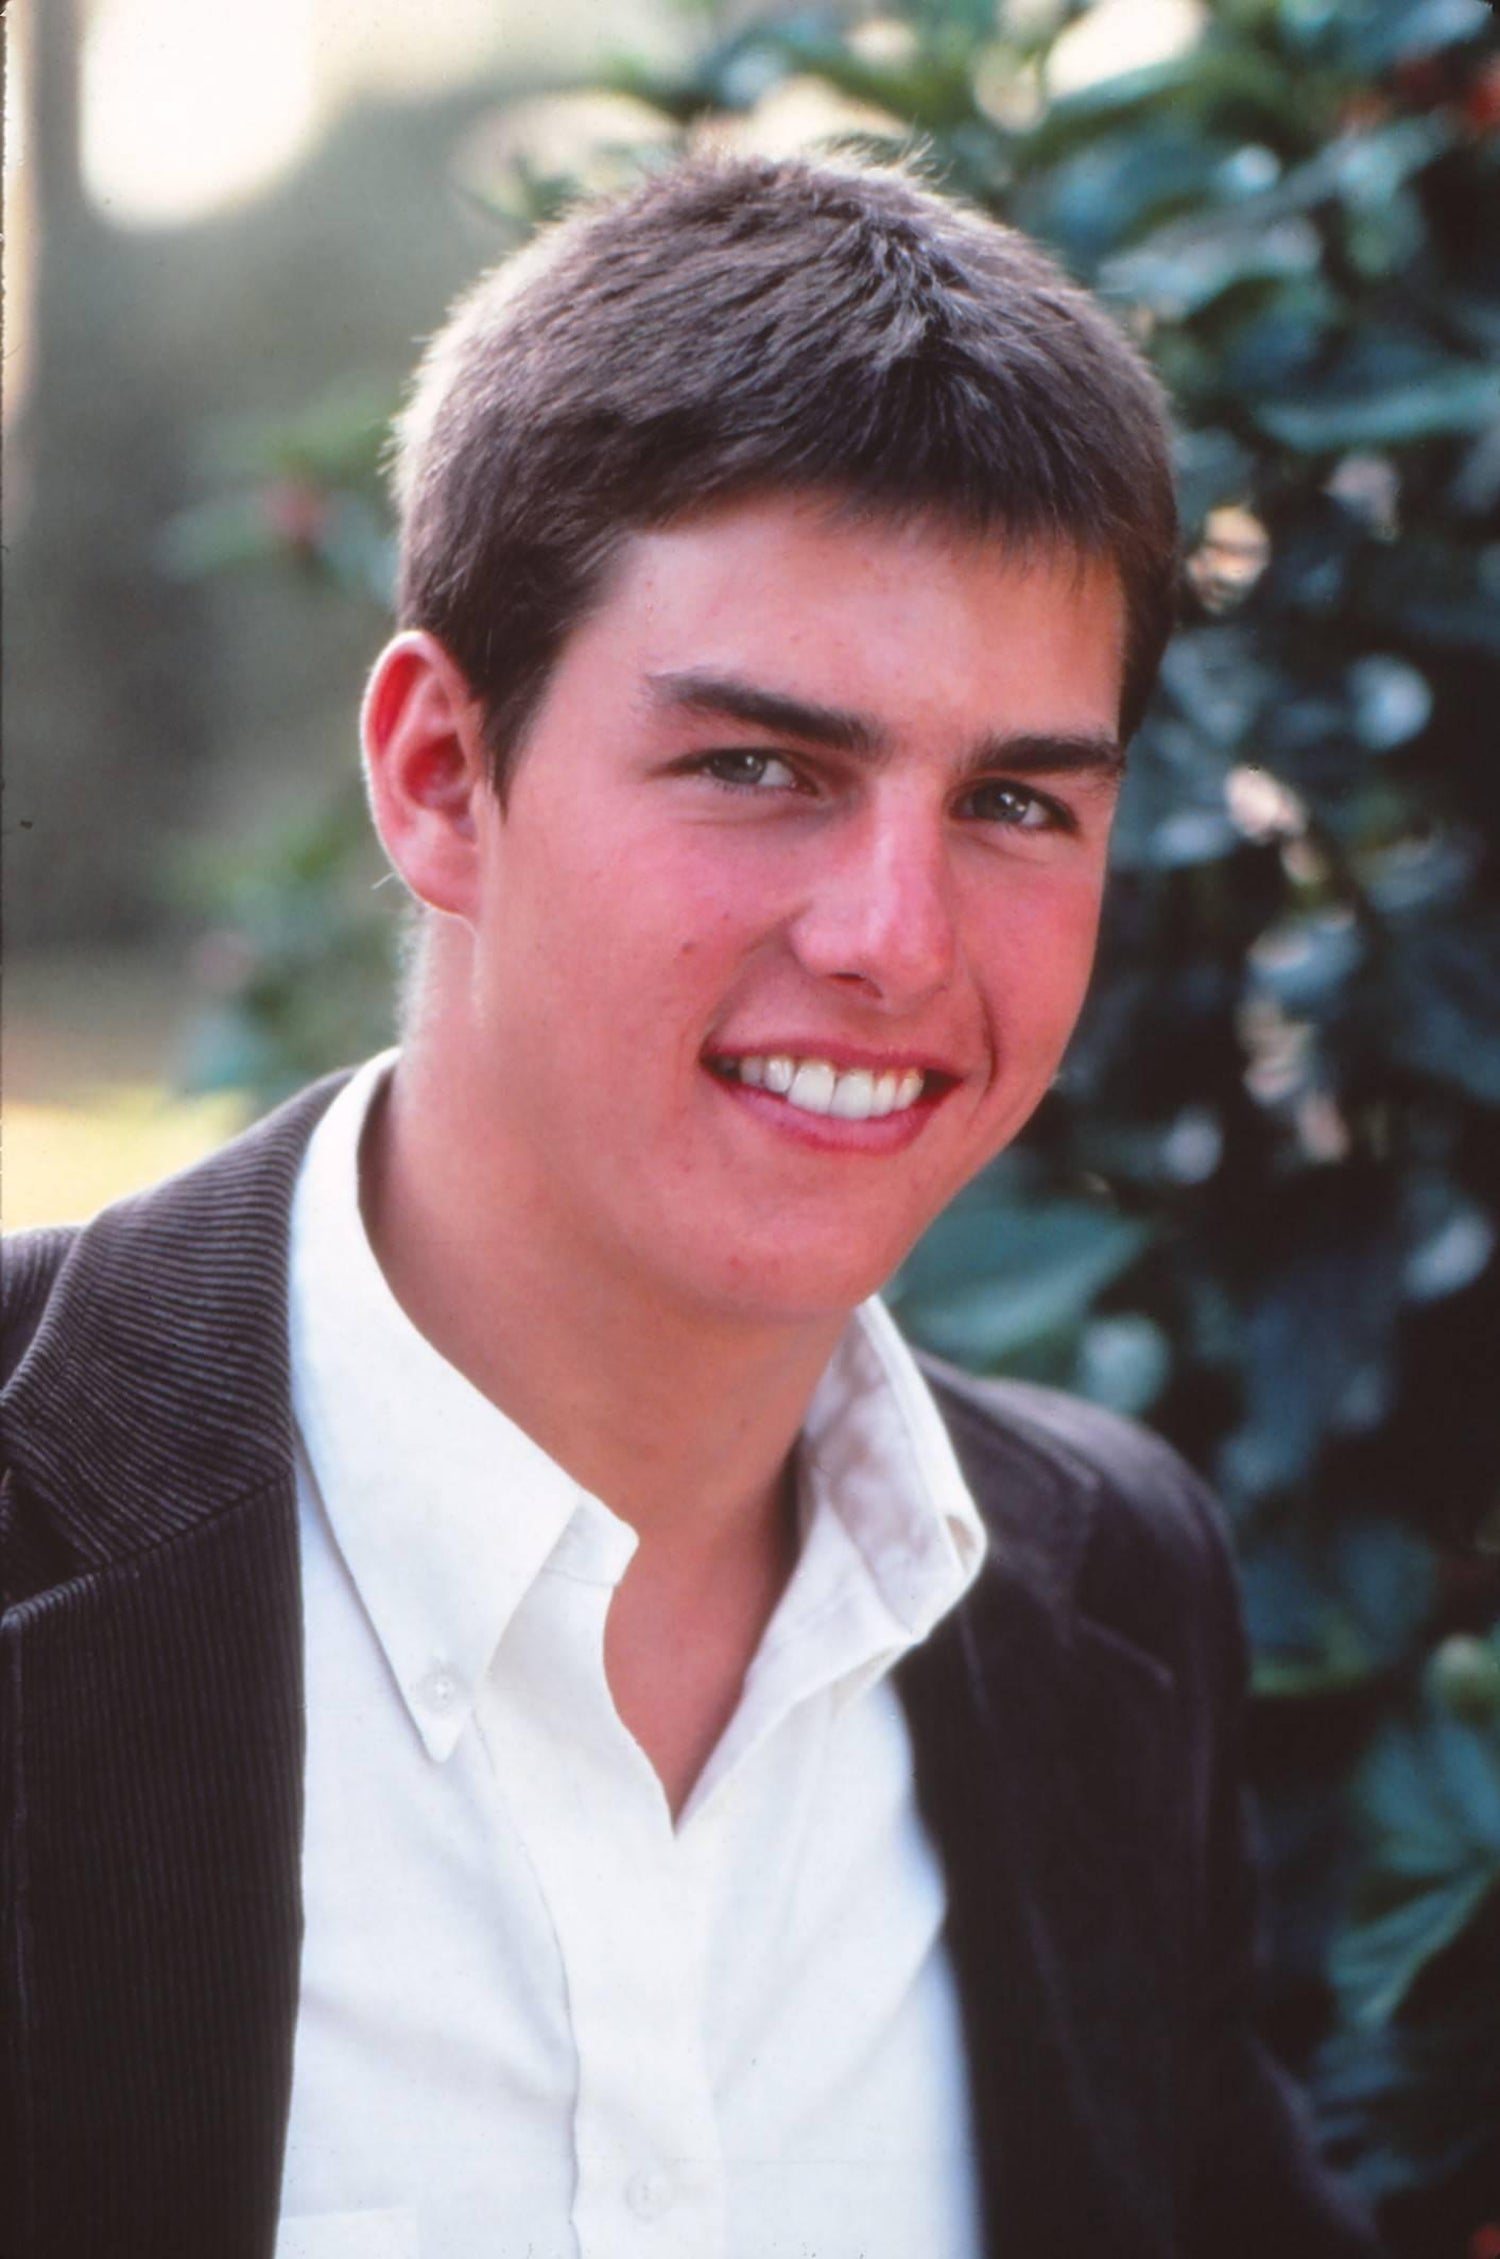 2825899_TOM_CRUISE_a_YOUNG_UNKNOWN_TEEN_in_COLOR_539x_master.jpg